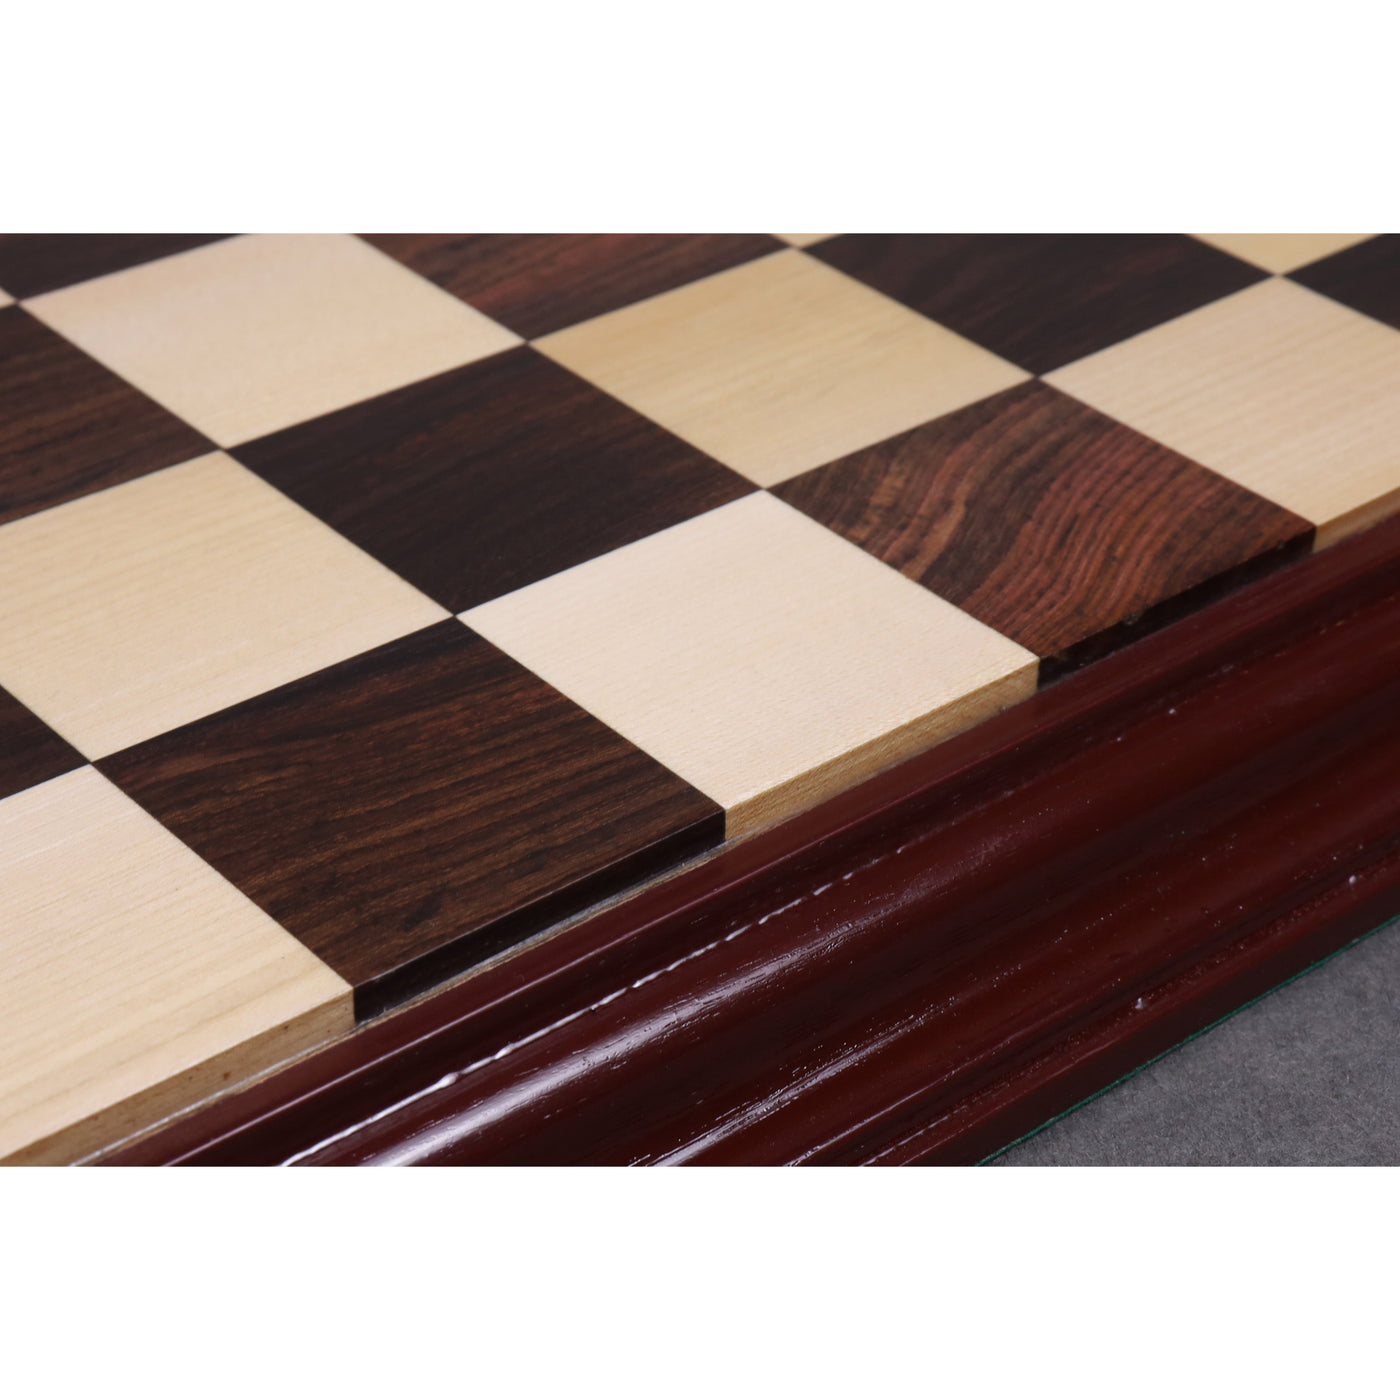 Rosewood & Maple Wood Luxury Chess board with Carved Border  -   Chess Storage Box - Travel Chess Set Magnetic